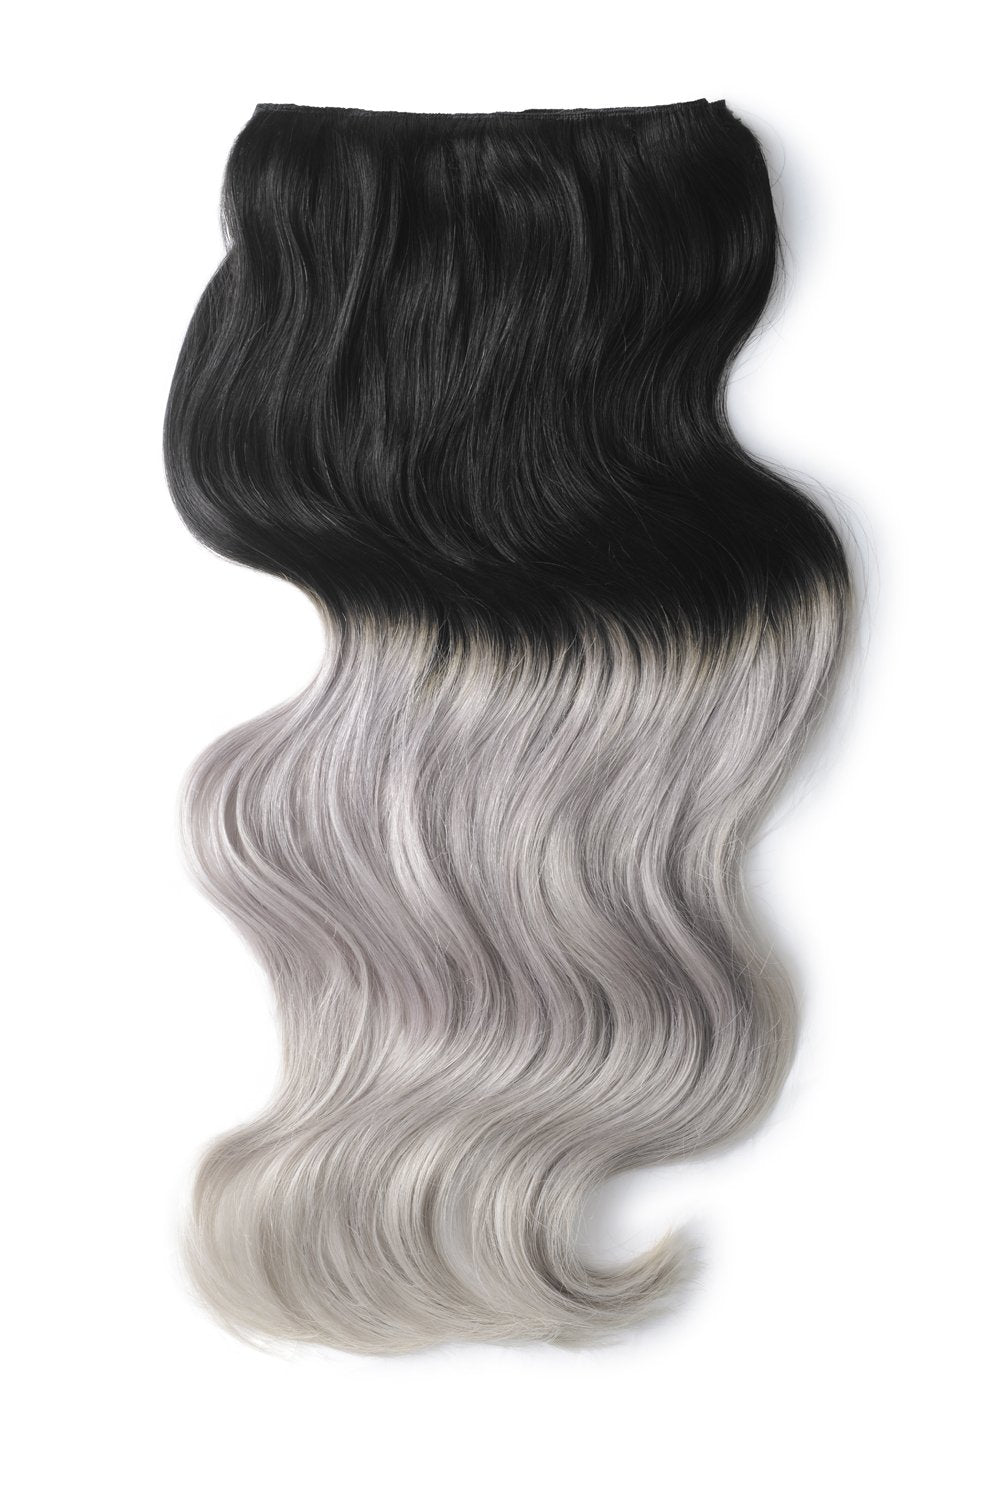 Full Head Remy Clip in Human Hair Extensions - Silver Black Ombre (#T1B/SG)